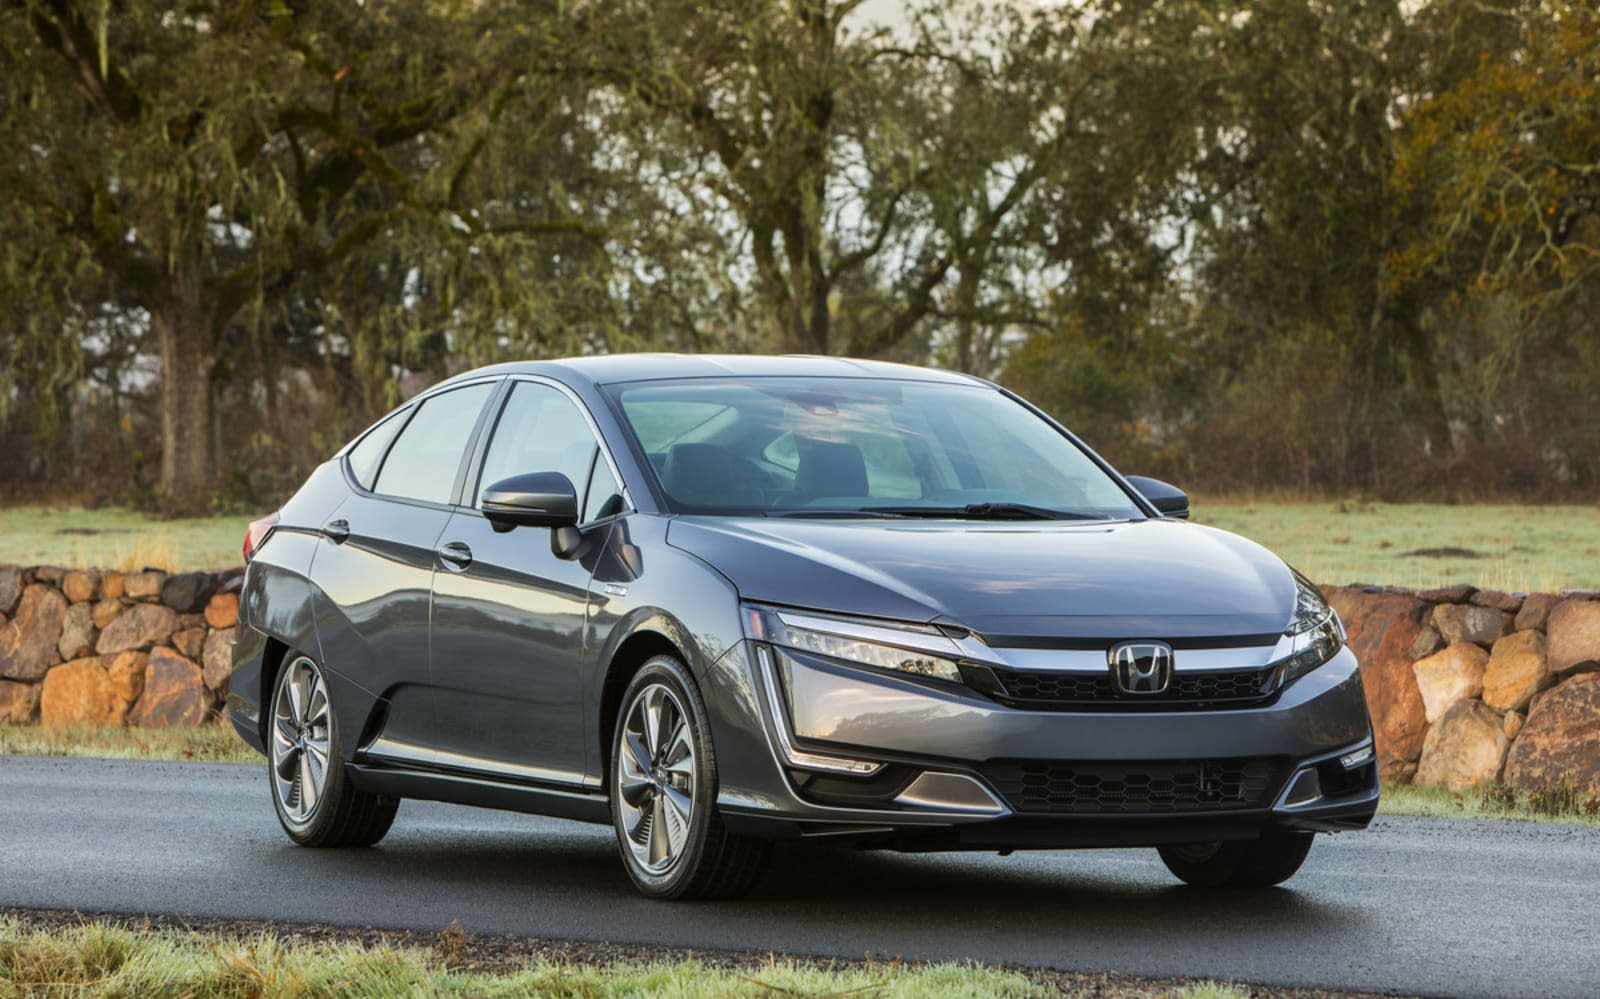 Honda will discontinue its Clarity EV in 2020 | Engadget